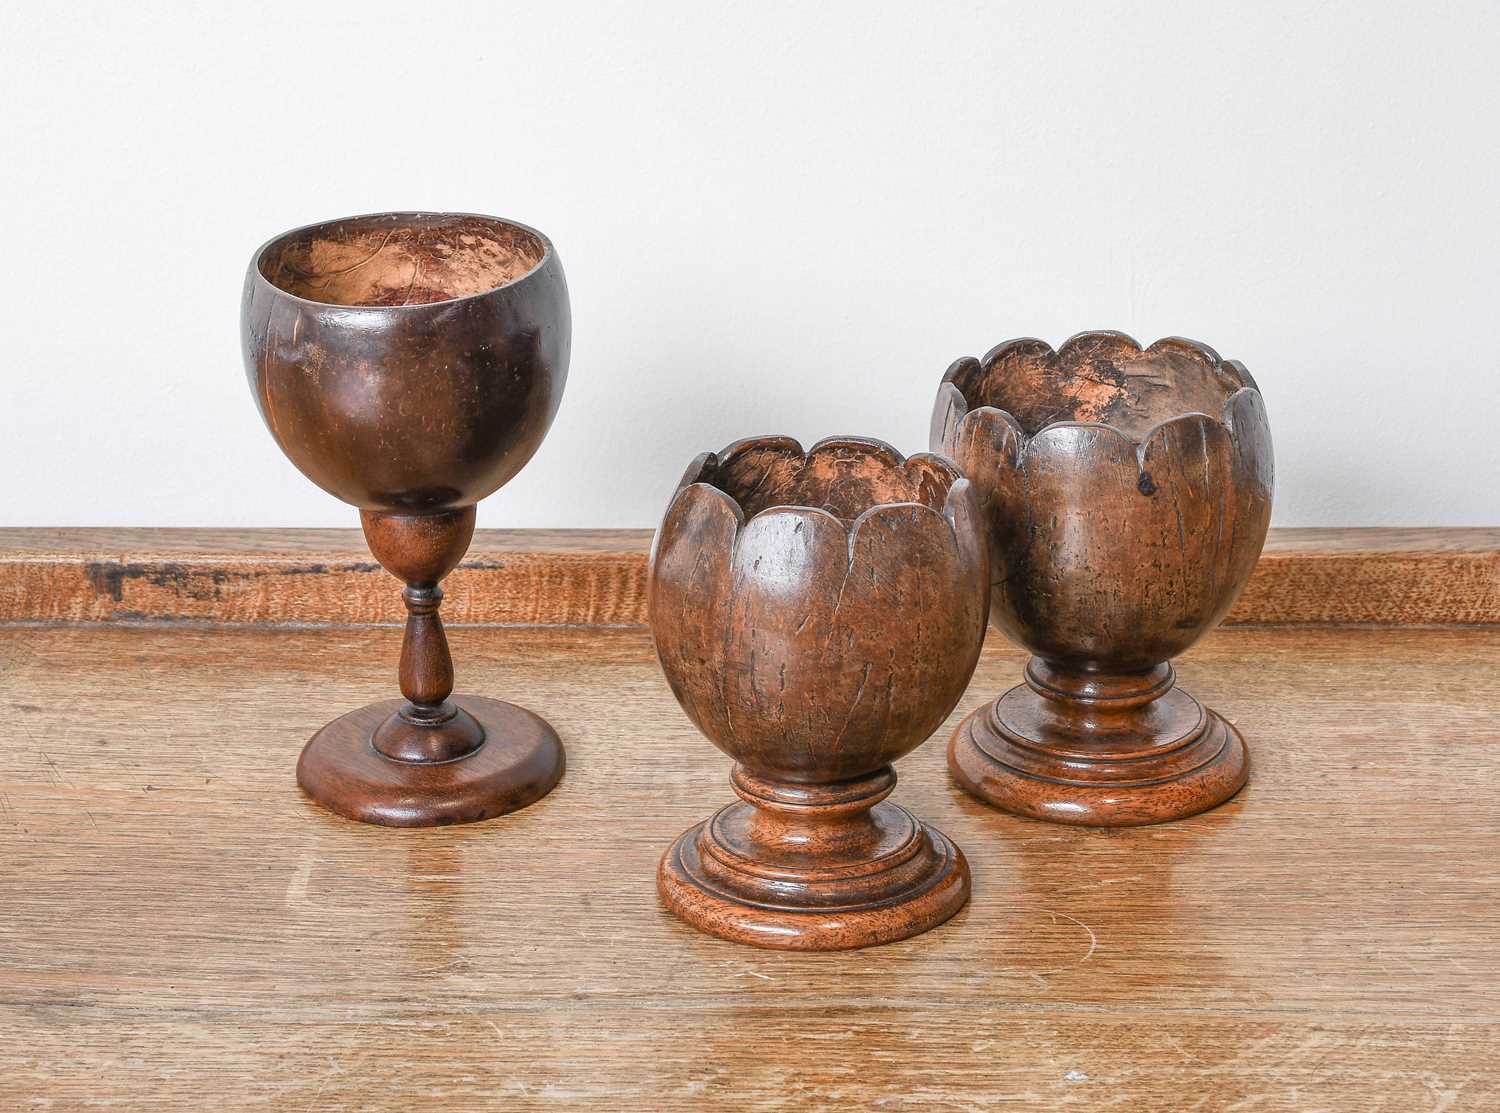 A Near Pair of Coconut Pedestal Bowls, 19th century, with lobed rims and on stepped circilar